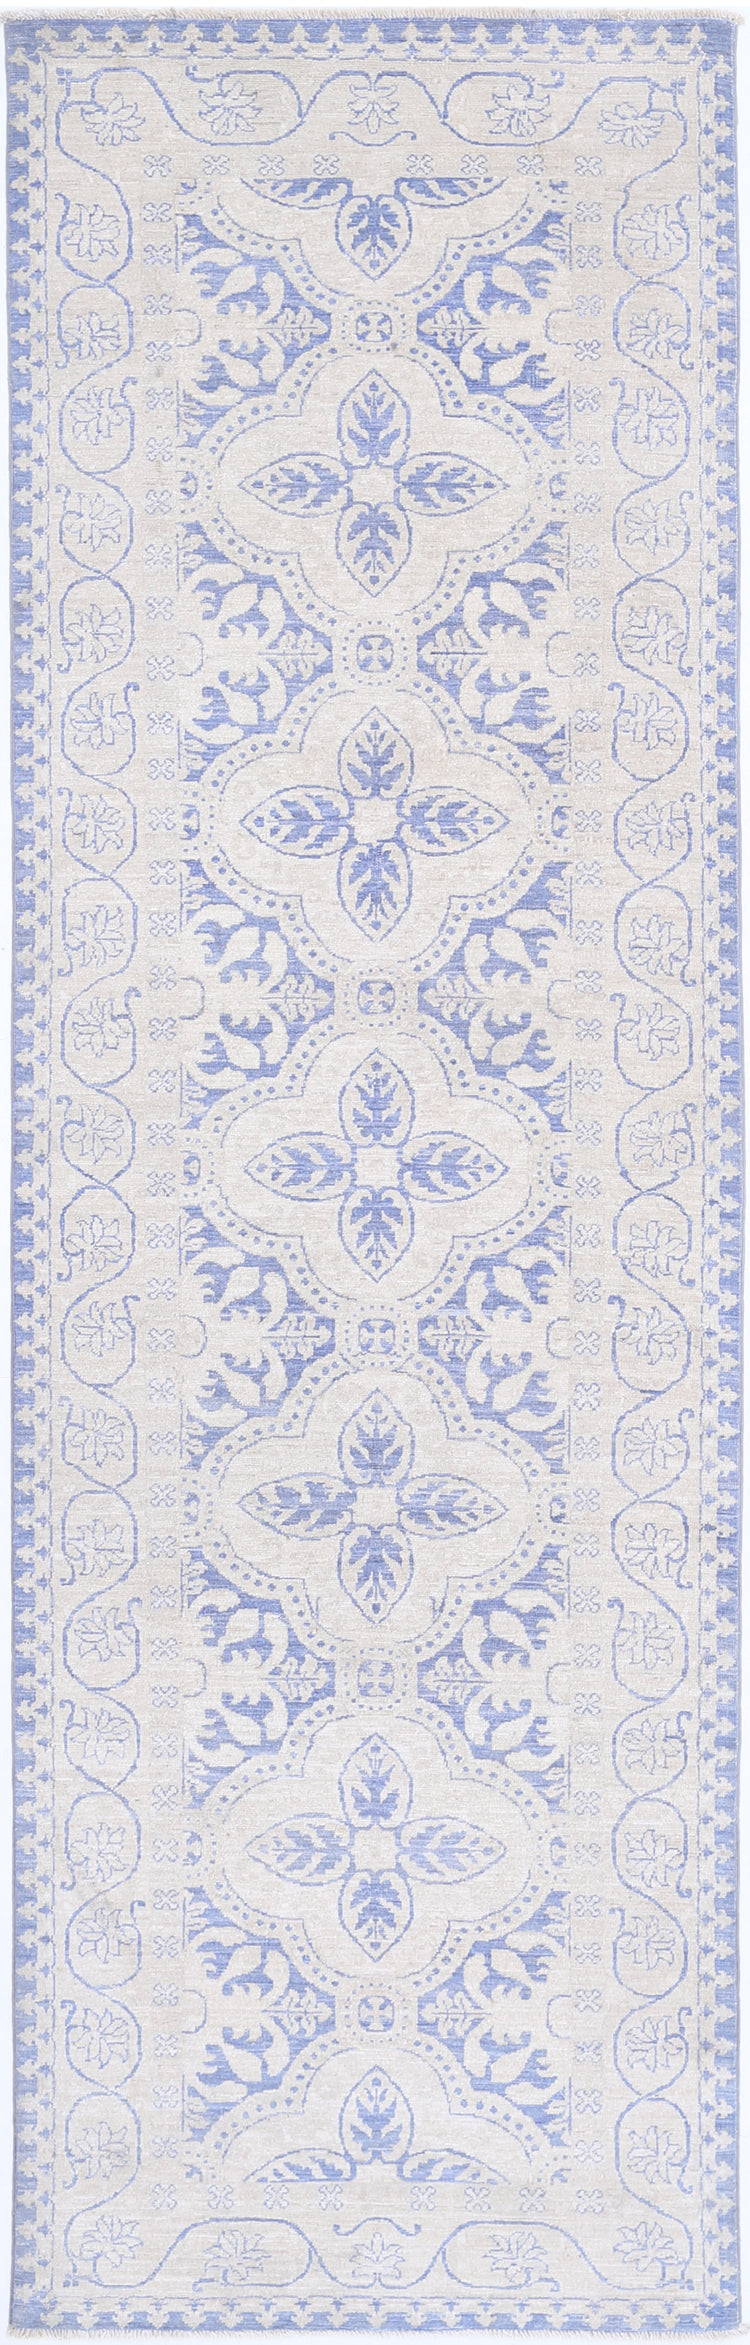 Traditional Hand Knotted Serenity Tabriz Wool Rug of Size 2'11'' X 9'10'' in Blue and Ivory Colors - Made in Afghanistan